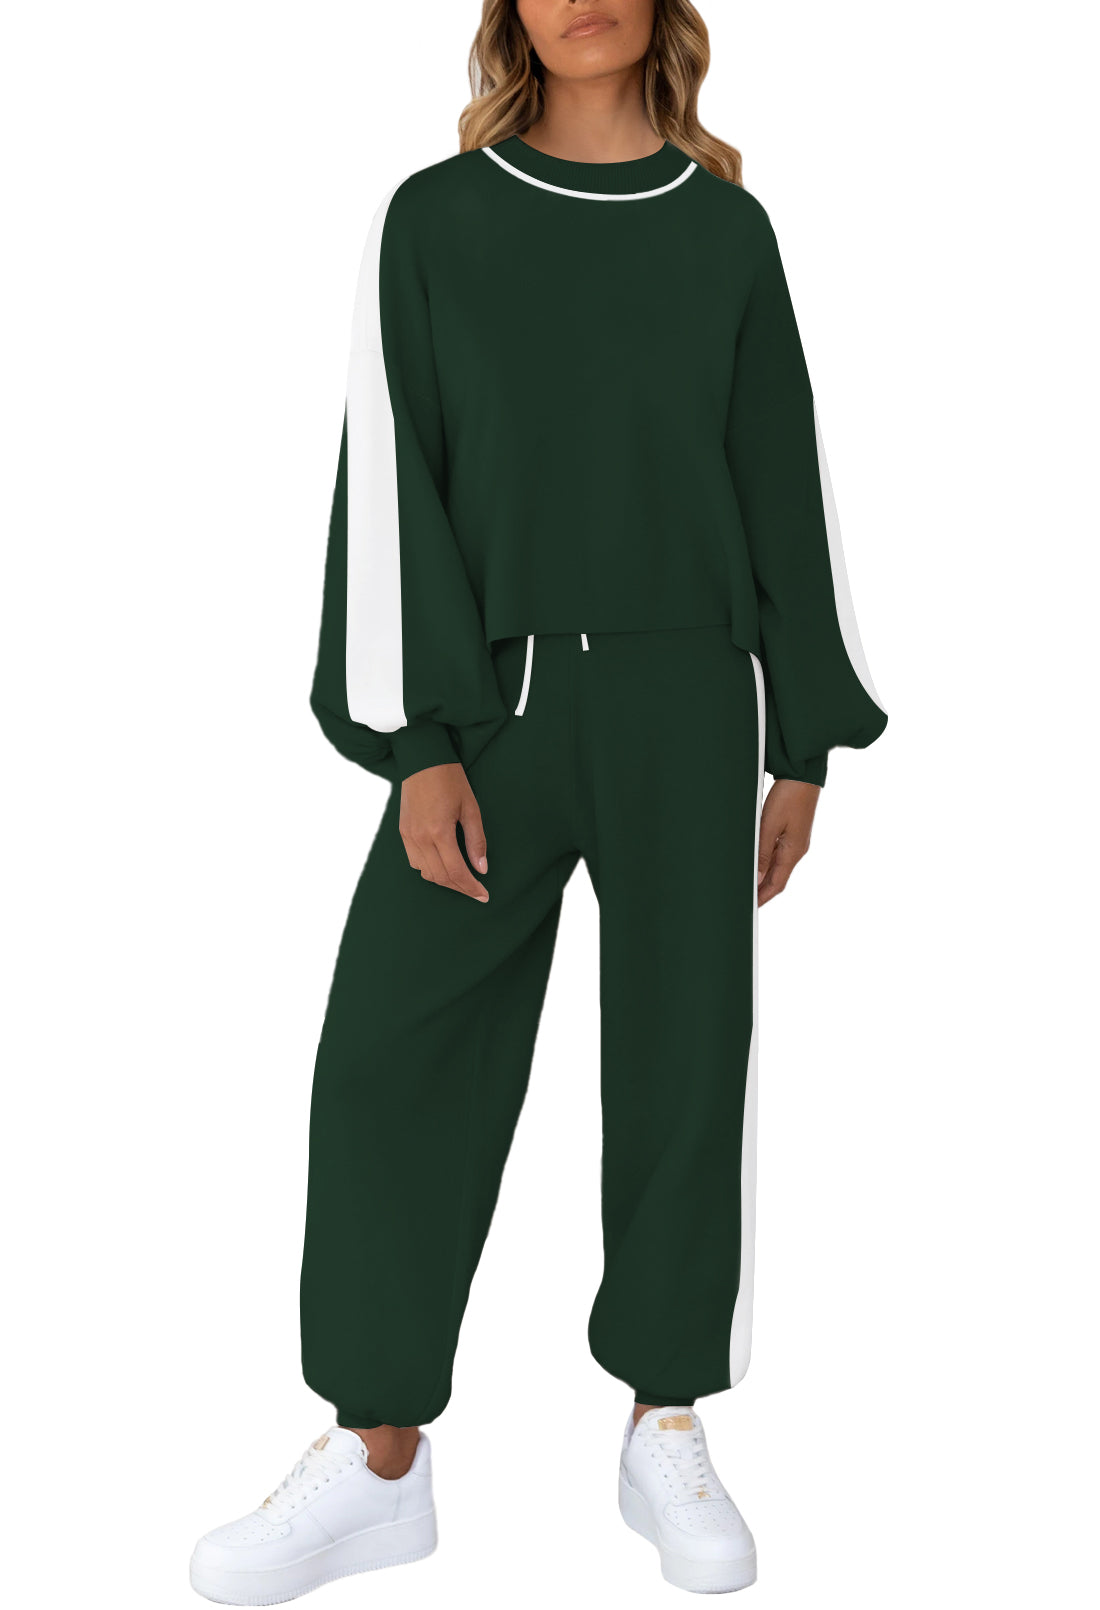 LC622153-109-L, LC622153-109-S, LC622153-109-M, LC622153-109-XL, Blue-green Women's Two Piece Outfits Striped Sweatshirt Jogger Pants Tracksuit